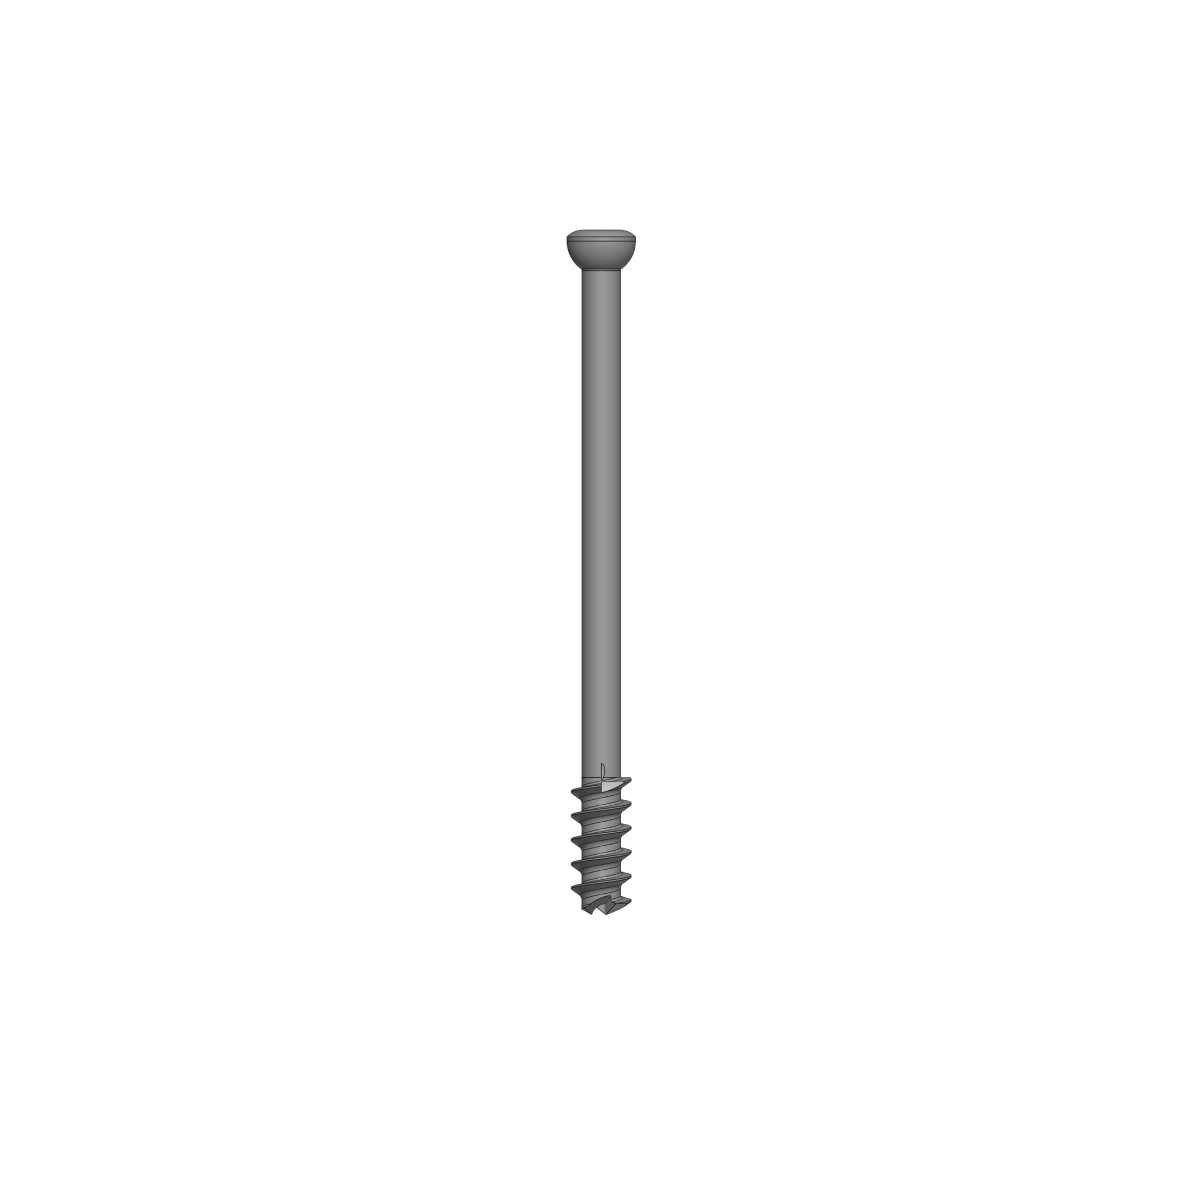 Large Cannulated Cancellous Screw 7.0 MM Dia. 16 MM Thread